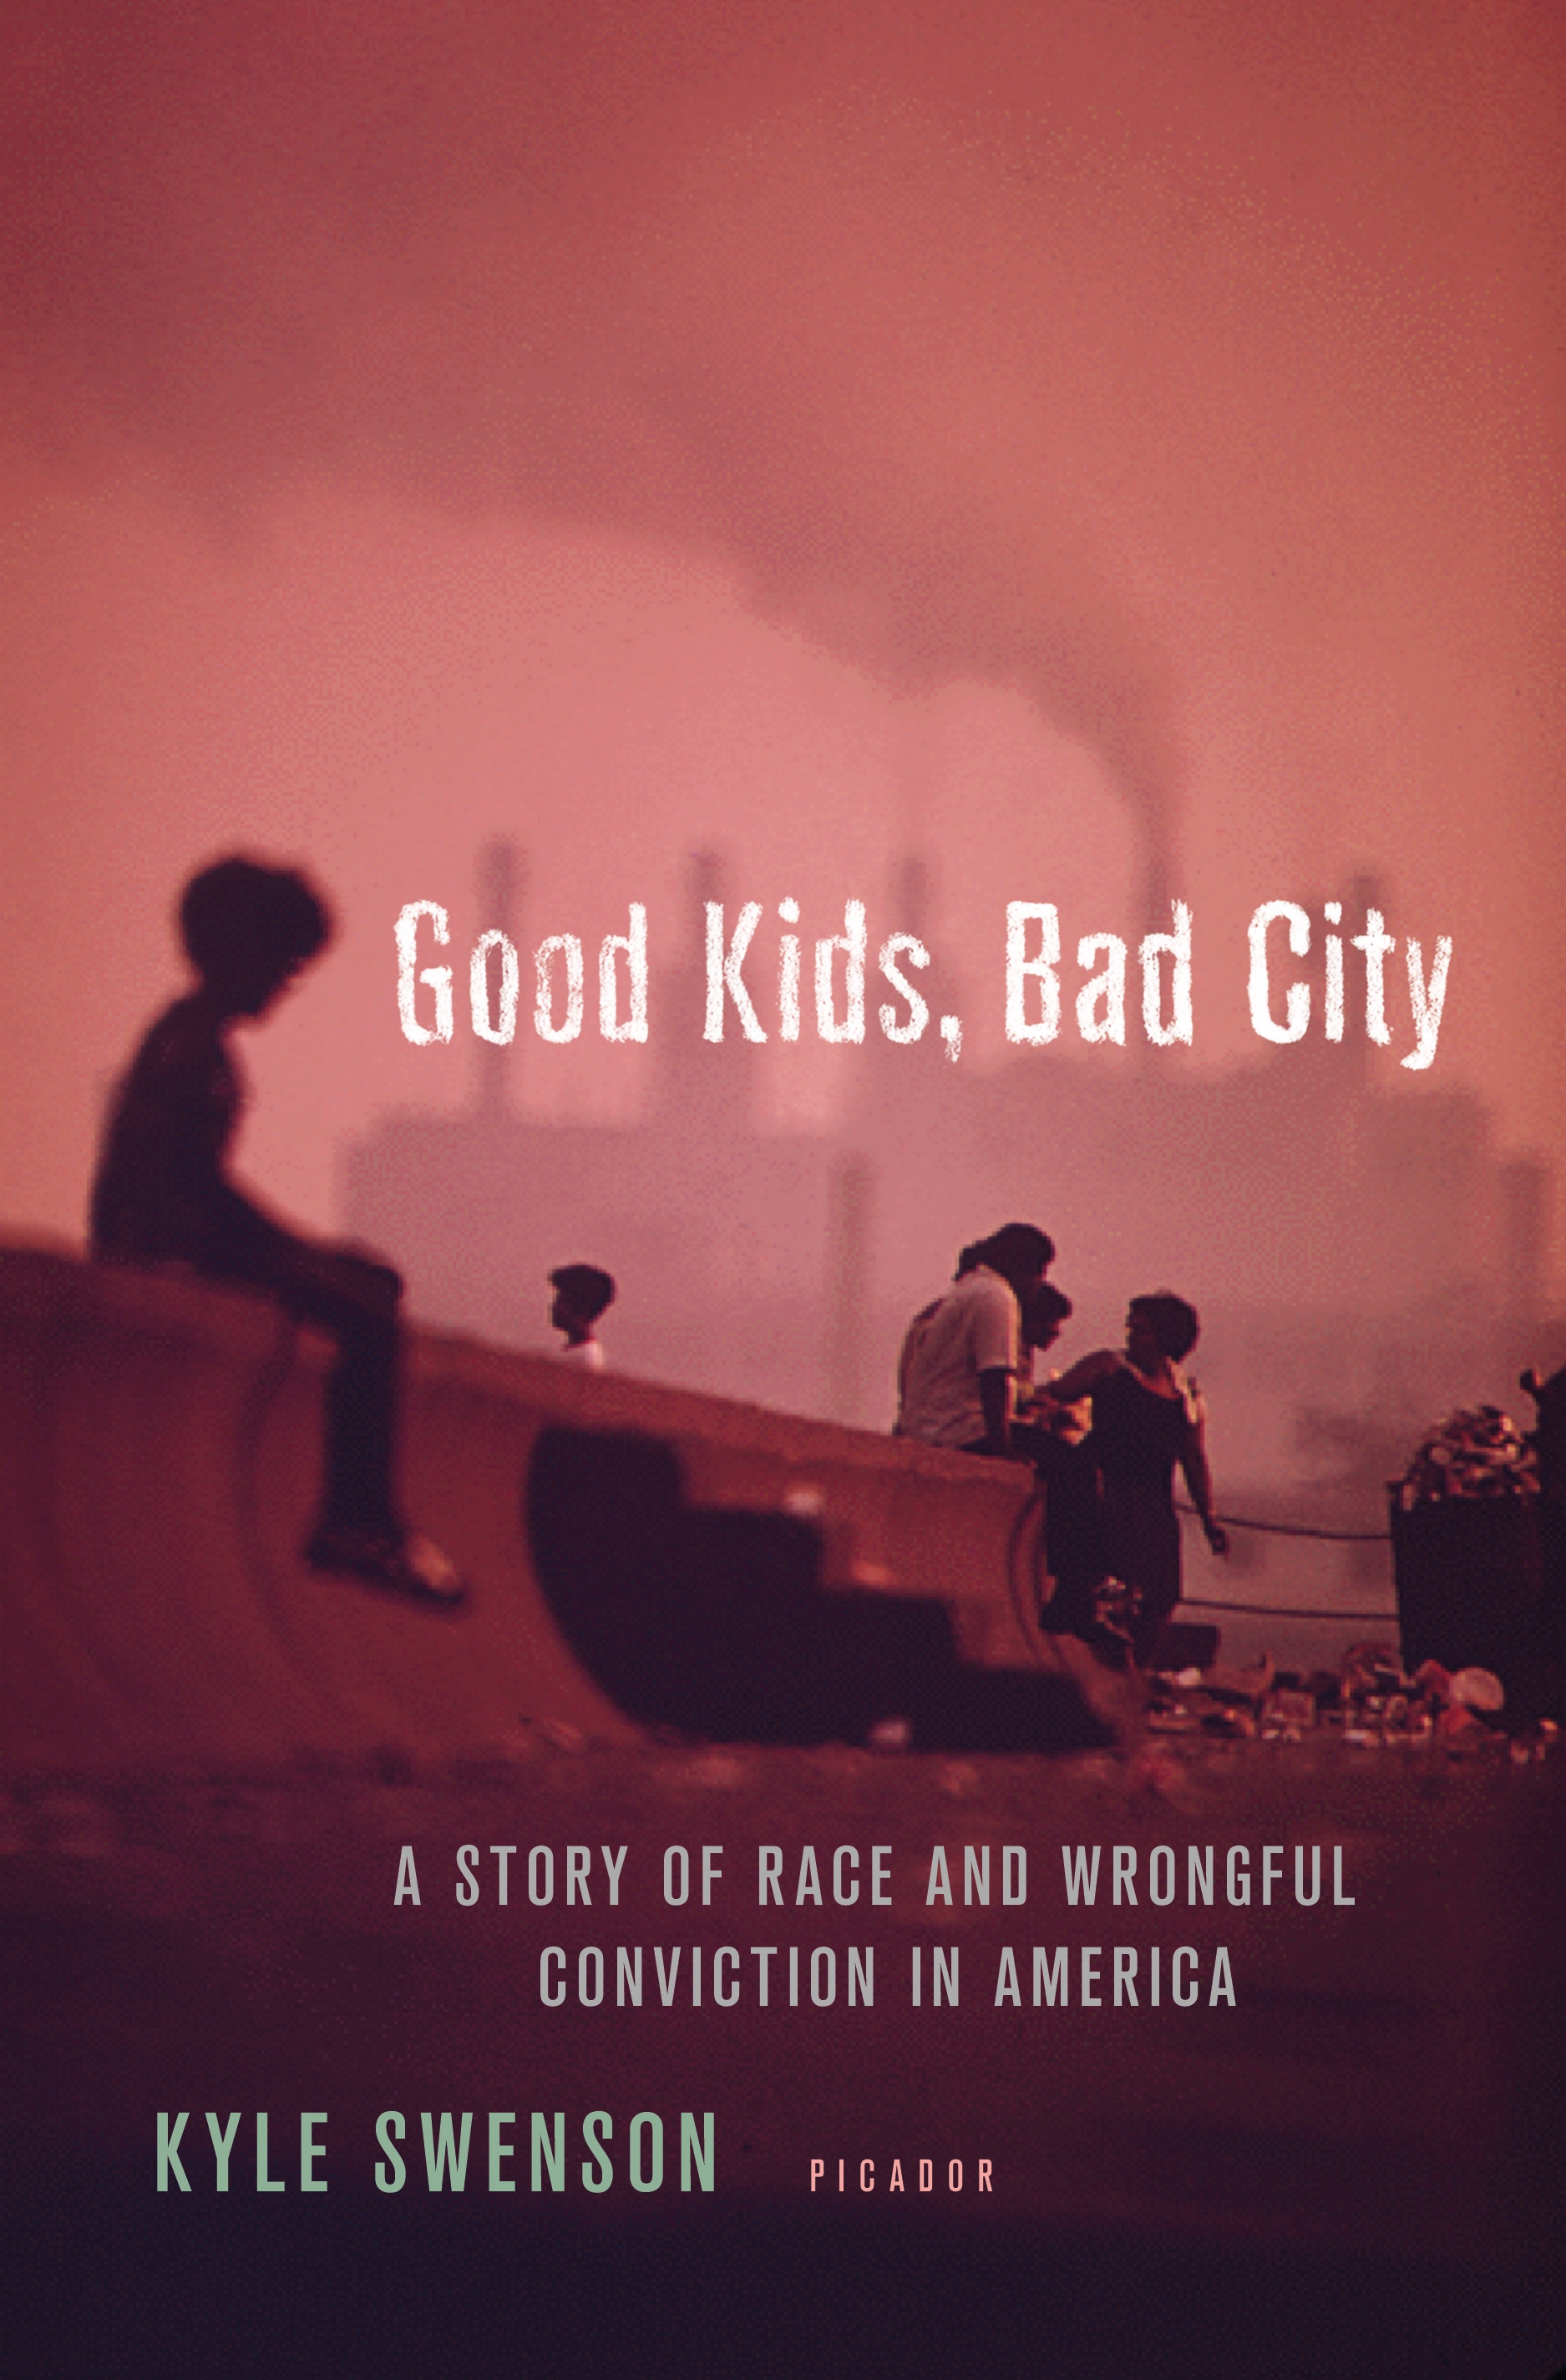 Book “Good Kids, Bad City” by Kyle Swenson — March 17, 2020